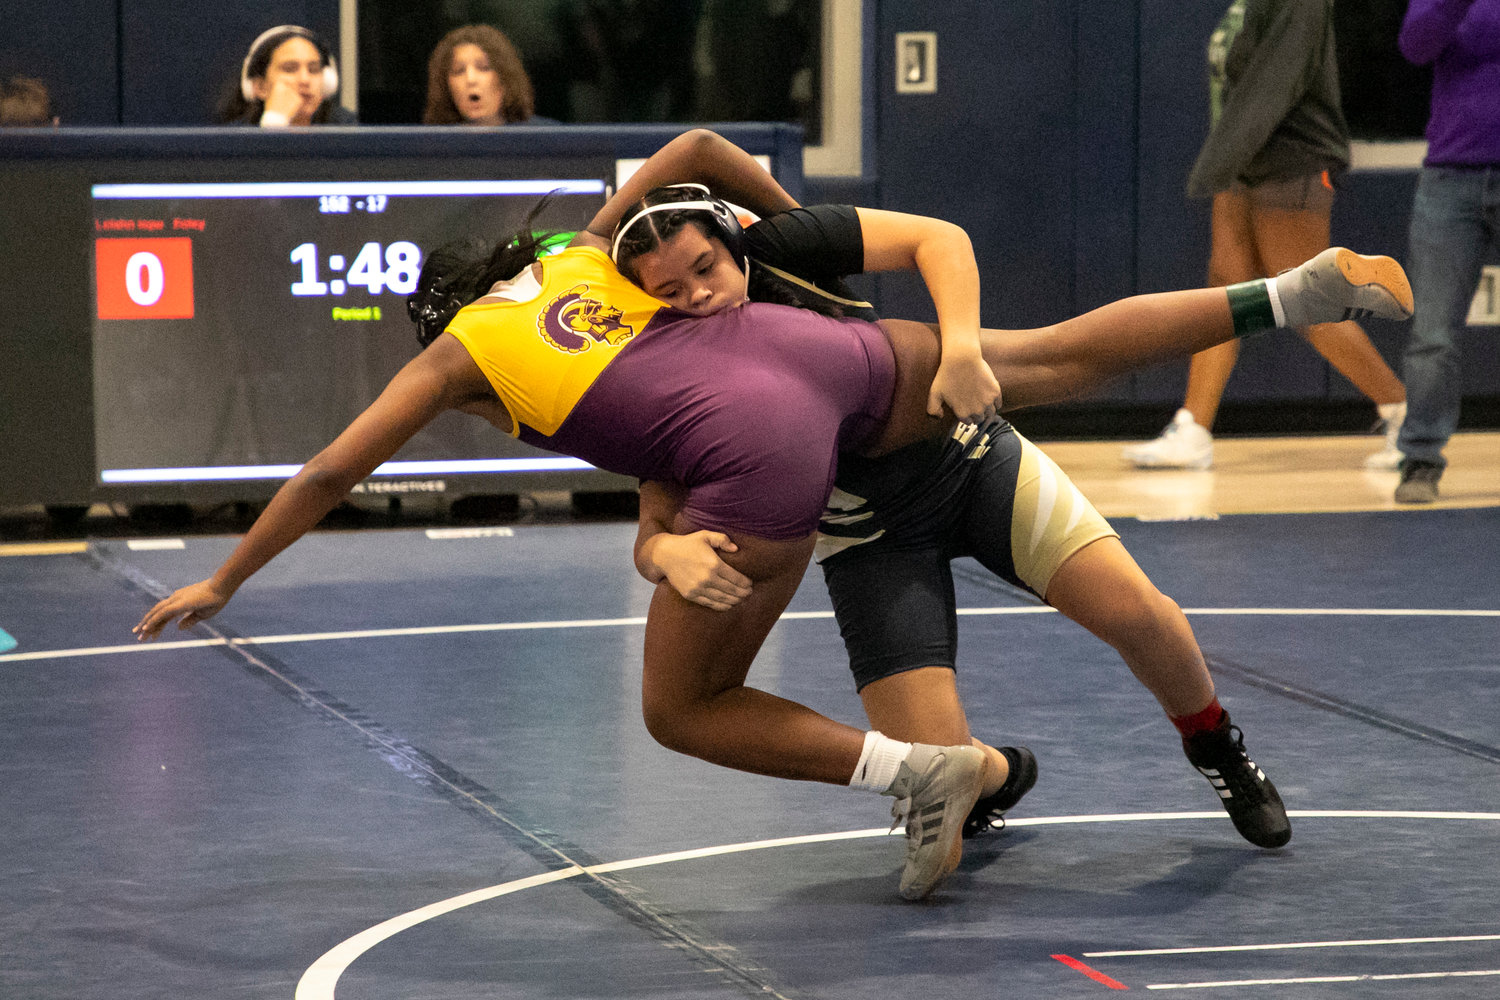 Lelahn Iopu from Foley looks to takedown Taliah Wade from Daphne during the 152-pound semifinal at Gulf Shores High School Friday, Jan. 6, as part of the Baldwin County Championships. Iopu went on to finish third in the class as one of four Lady Lions to earn podium finishes.